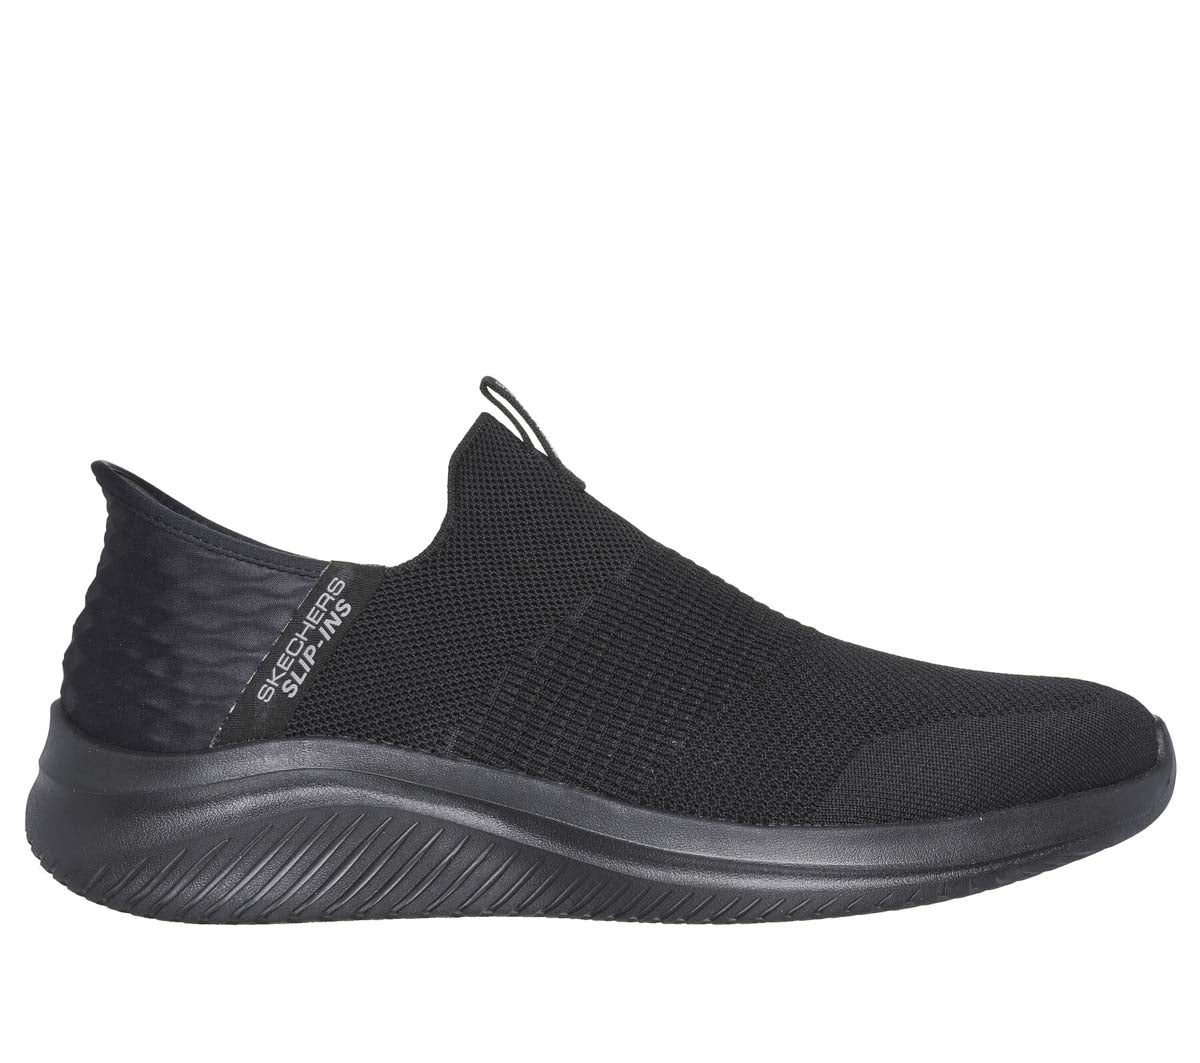     Front view of Skechers Ultra Flex 3.0 featuring the engineered knit upper.